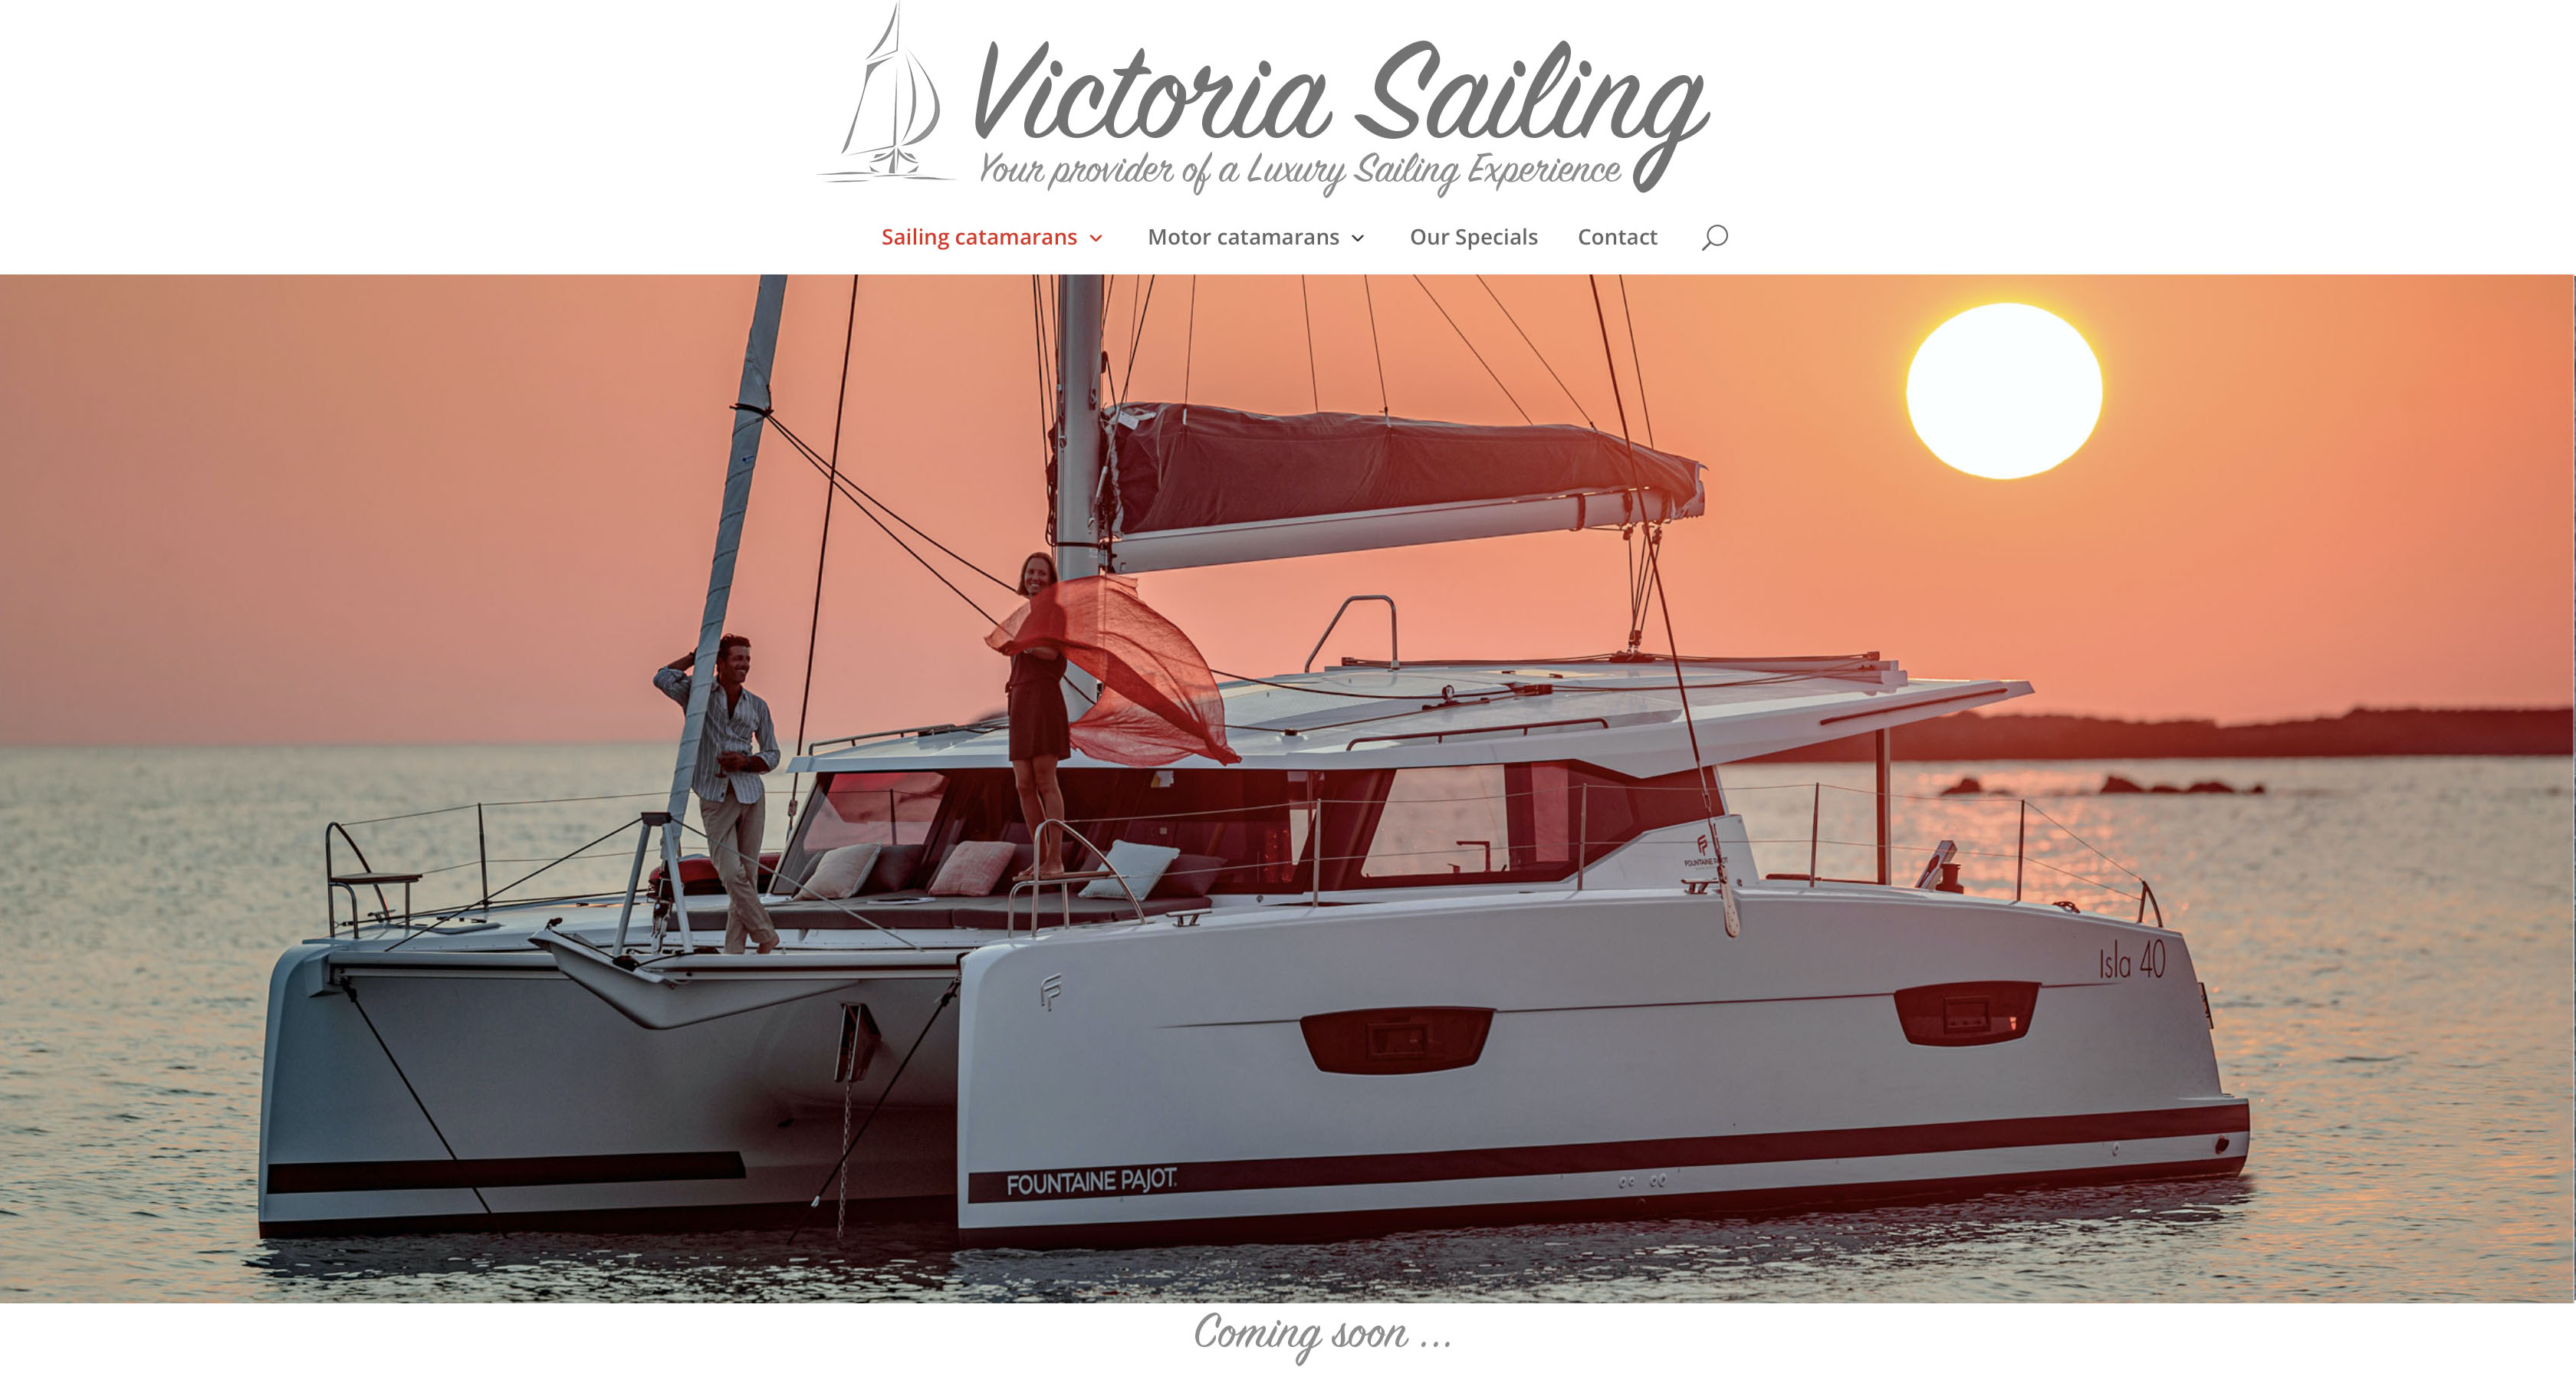 VictoriaSailing - Your provider of a Luxury Sailing Experience